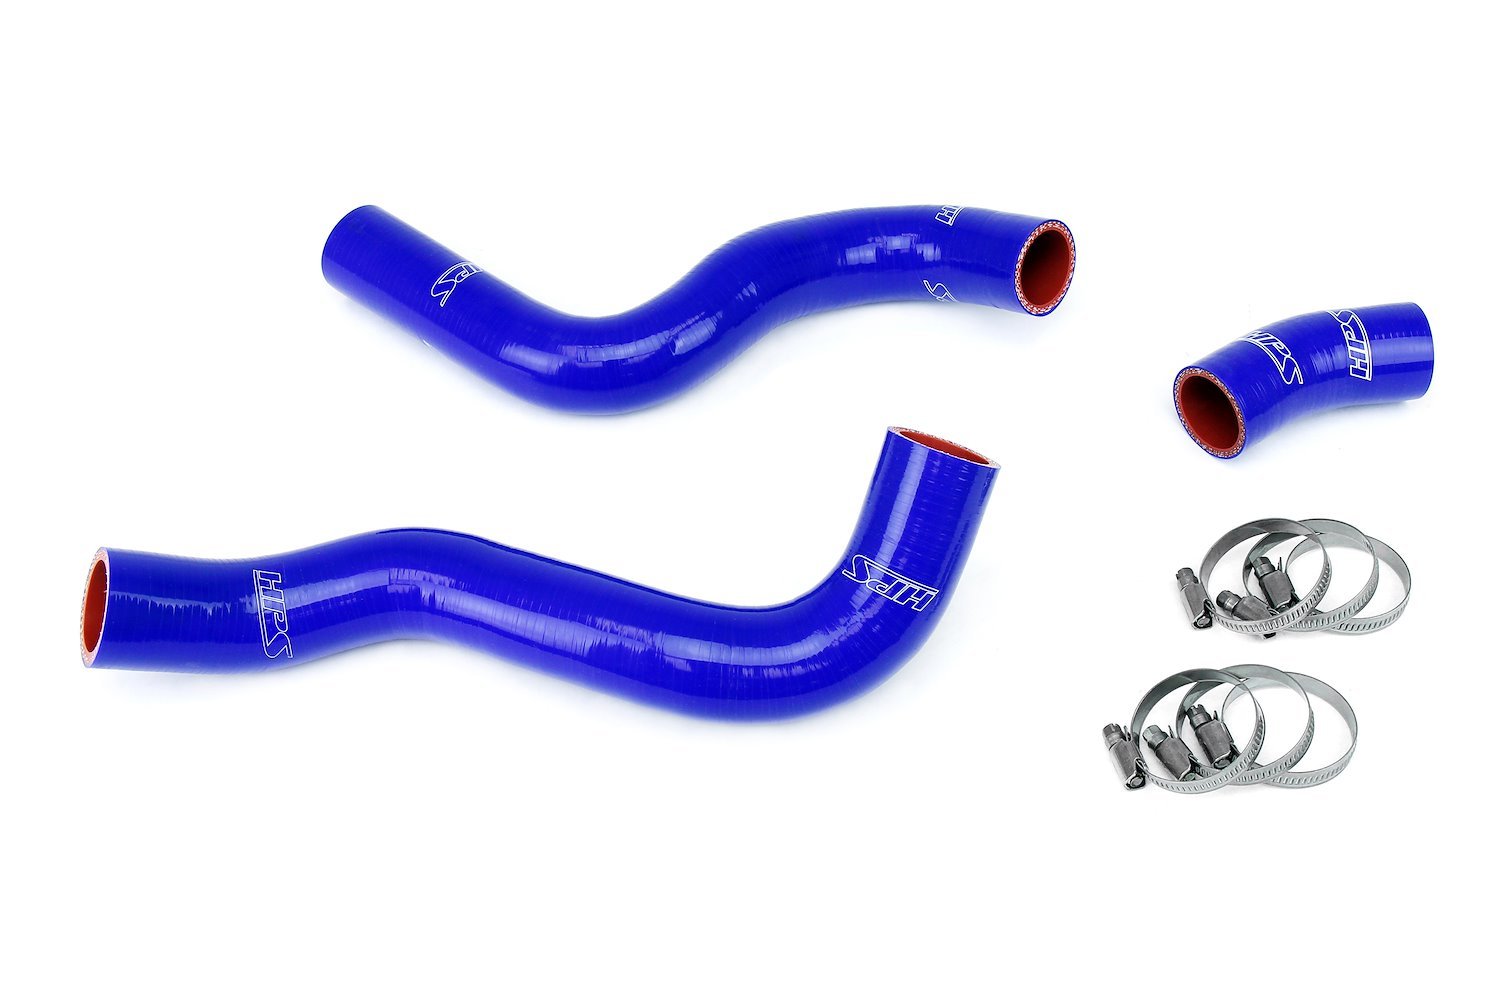 57-2055-BLUE Radiator Hose Kit, 3-Ply Reinforced Silicone, Replaces Rubber Radiator Coolant Hoses